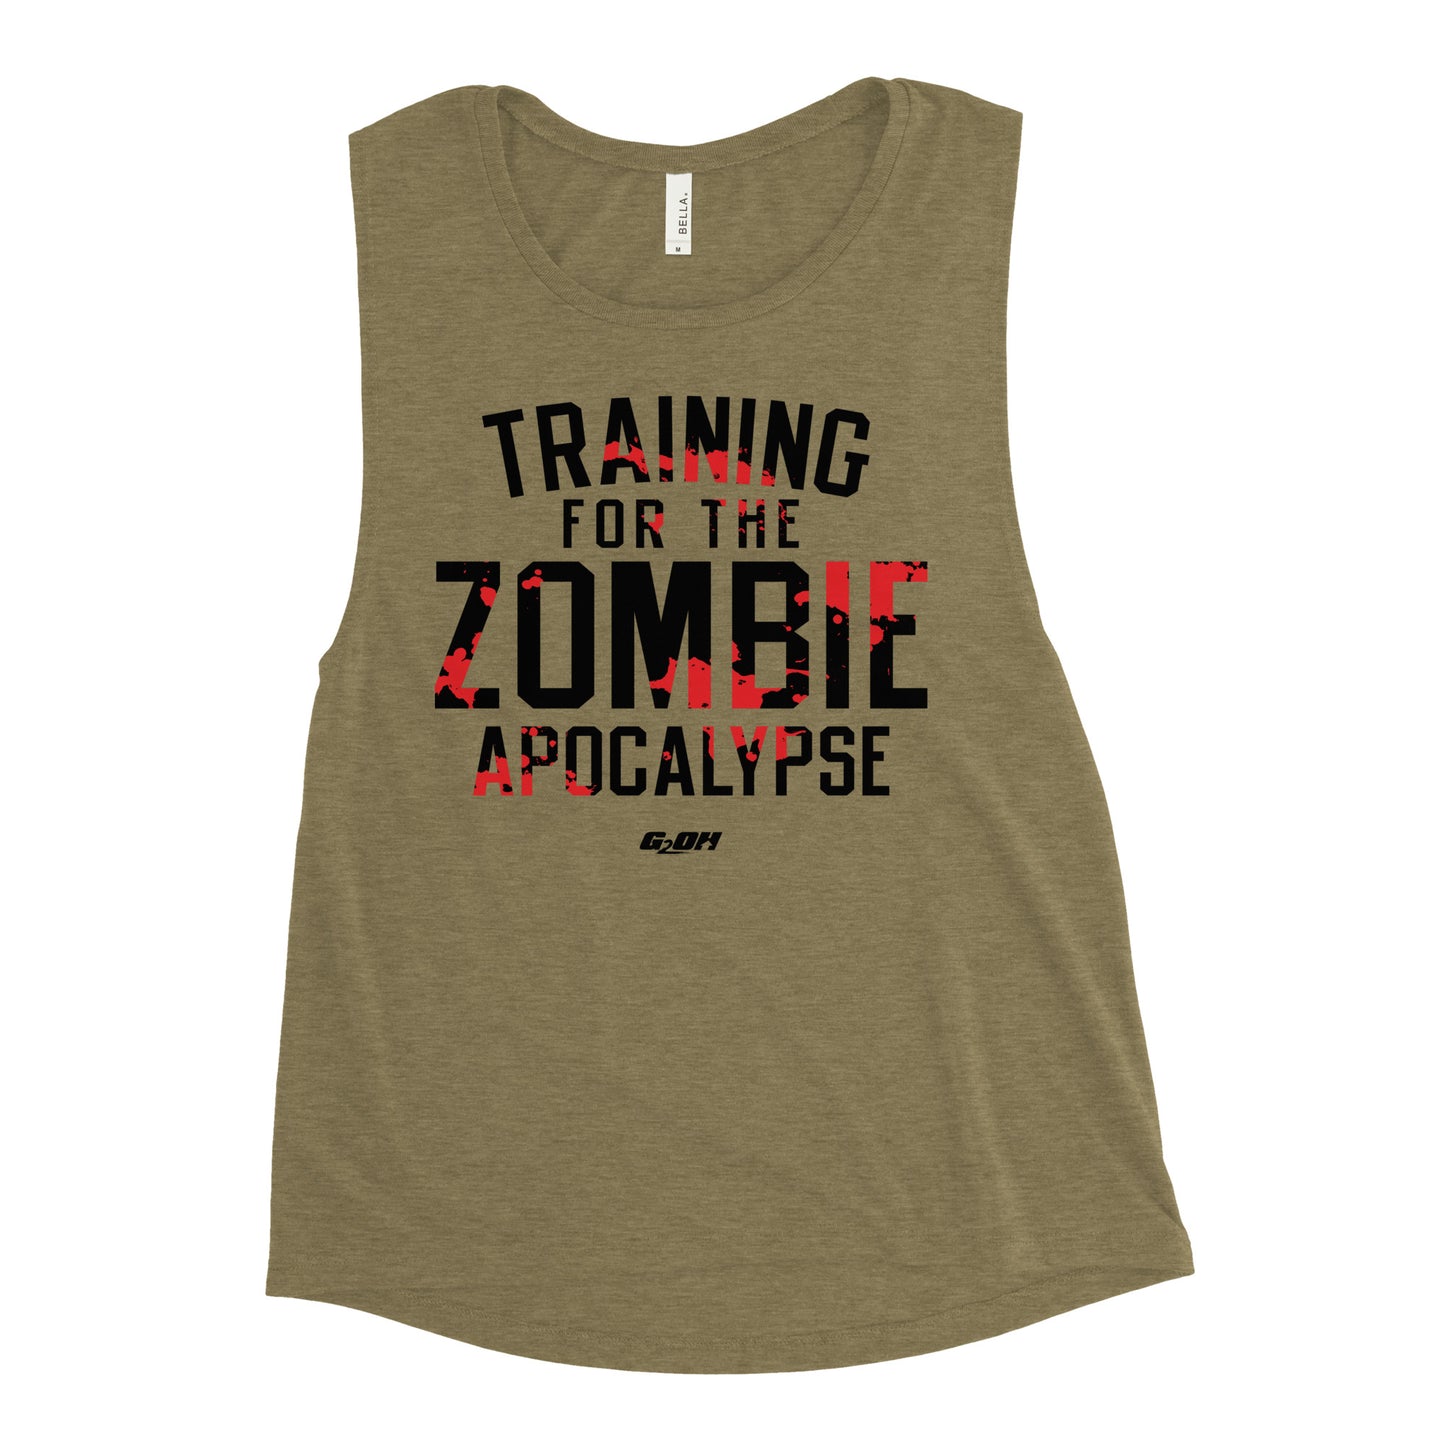 Training For The Zombie Apocalypse Women's Muscle Tank